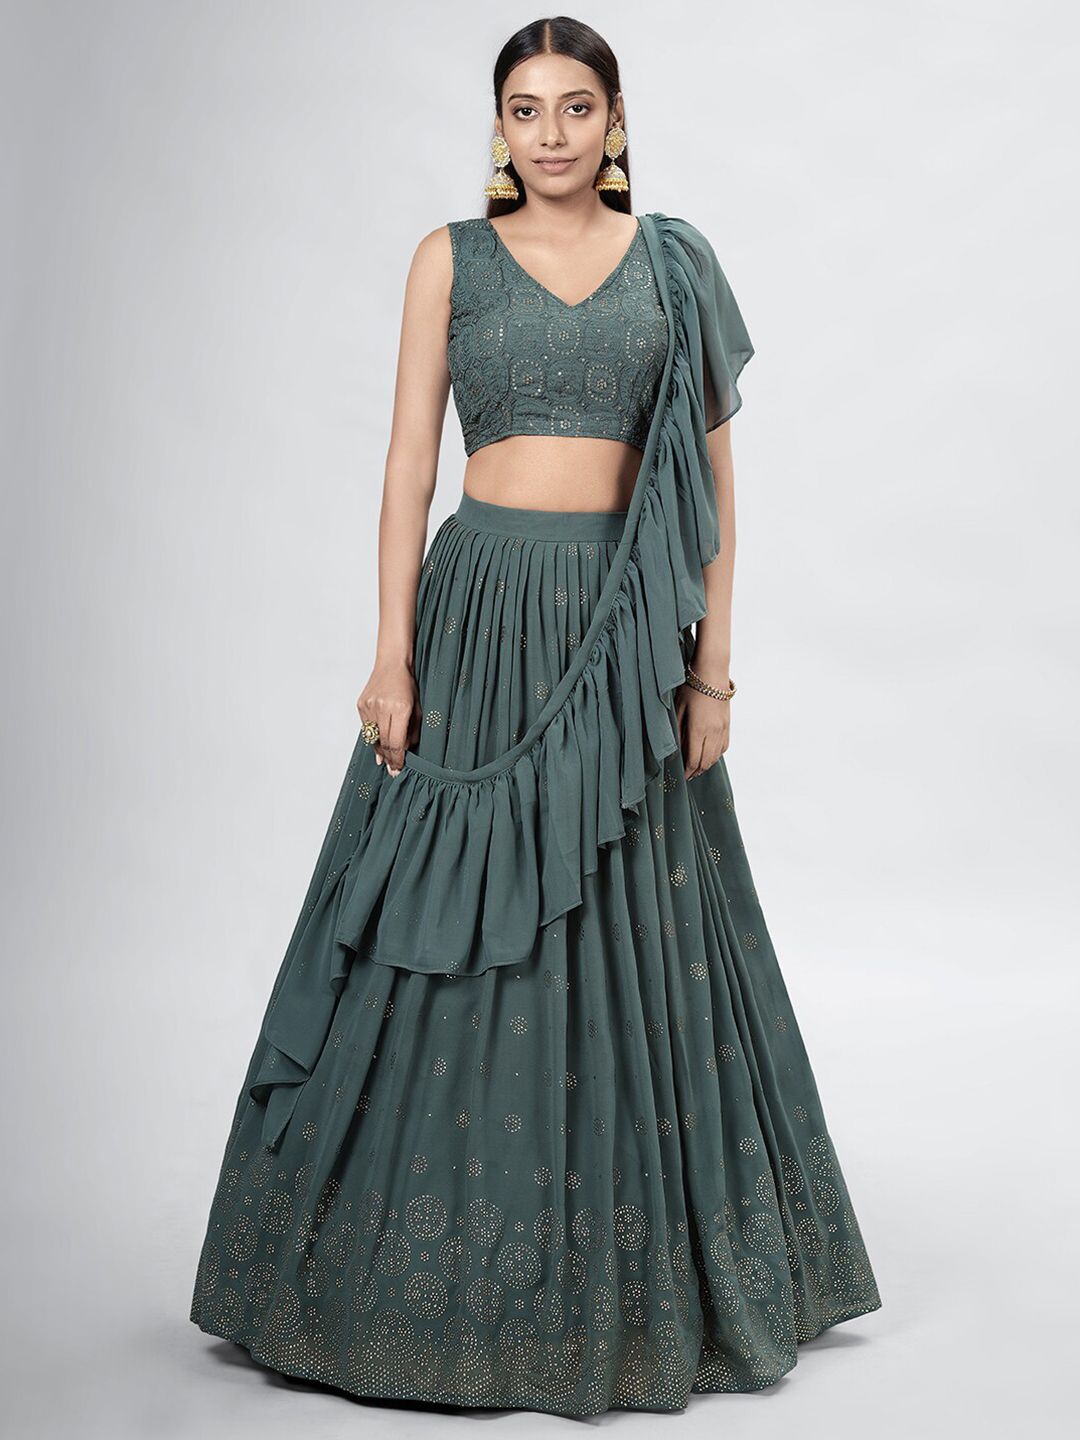 DRESSTIVE Green & Gold-Toned Embroidered Mukaish Semi-Stitched Lehenga & Unstitched Blouse With Dupatta Price in India